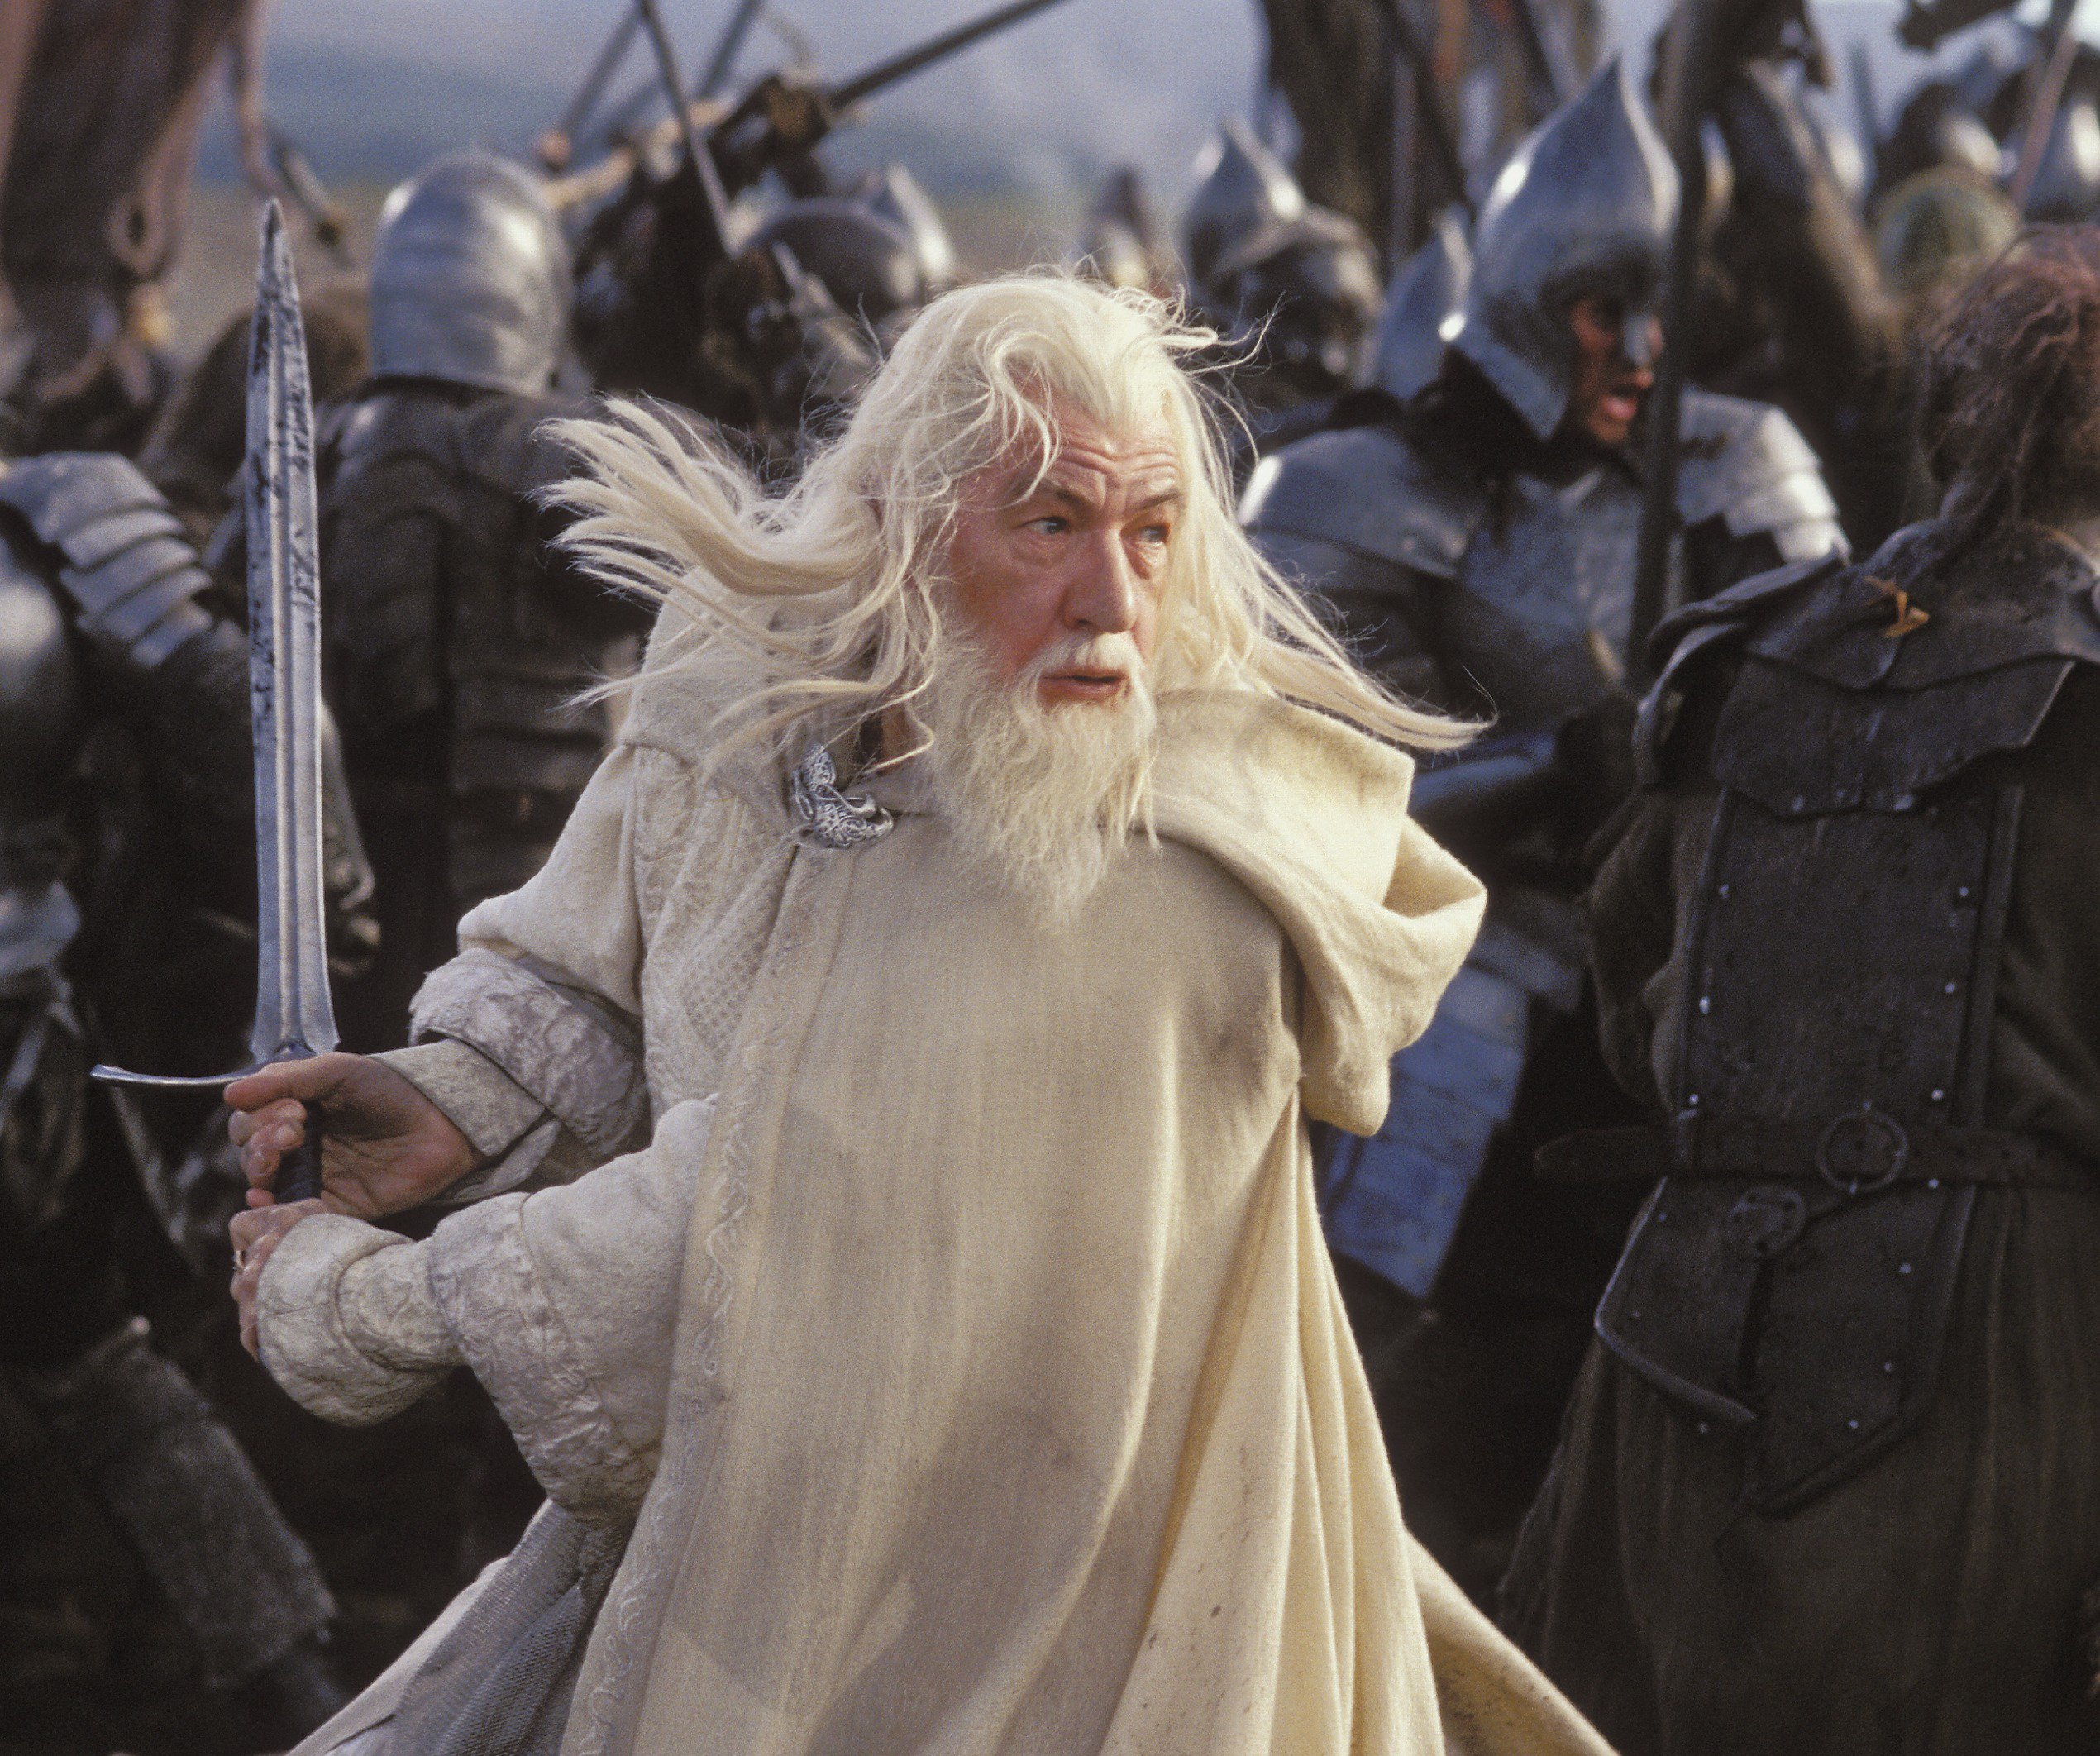 Ian McKellen releases journal entries he wrote during 'Lord of the Rings'  shoot - Times of India